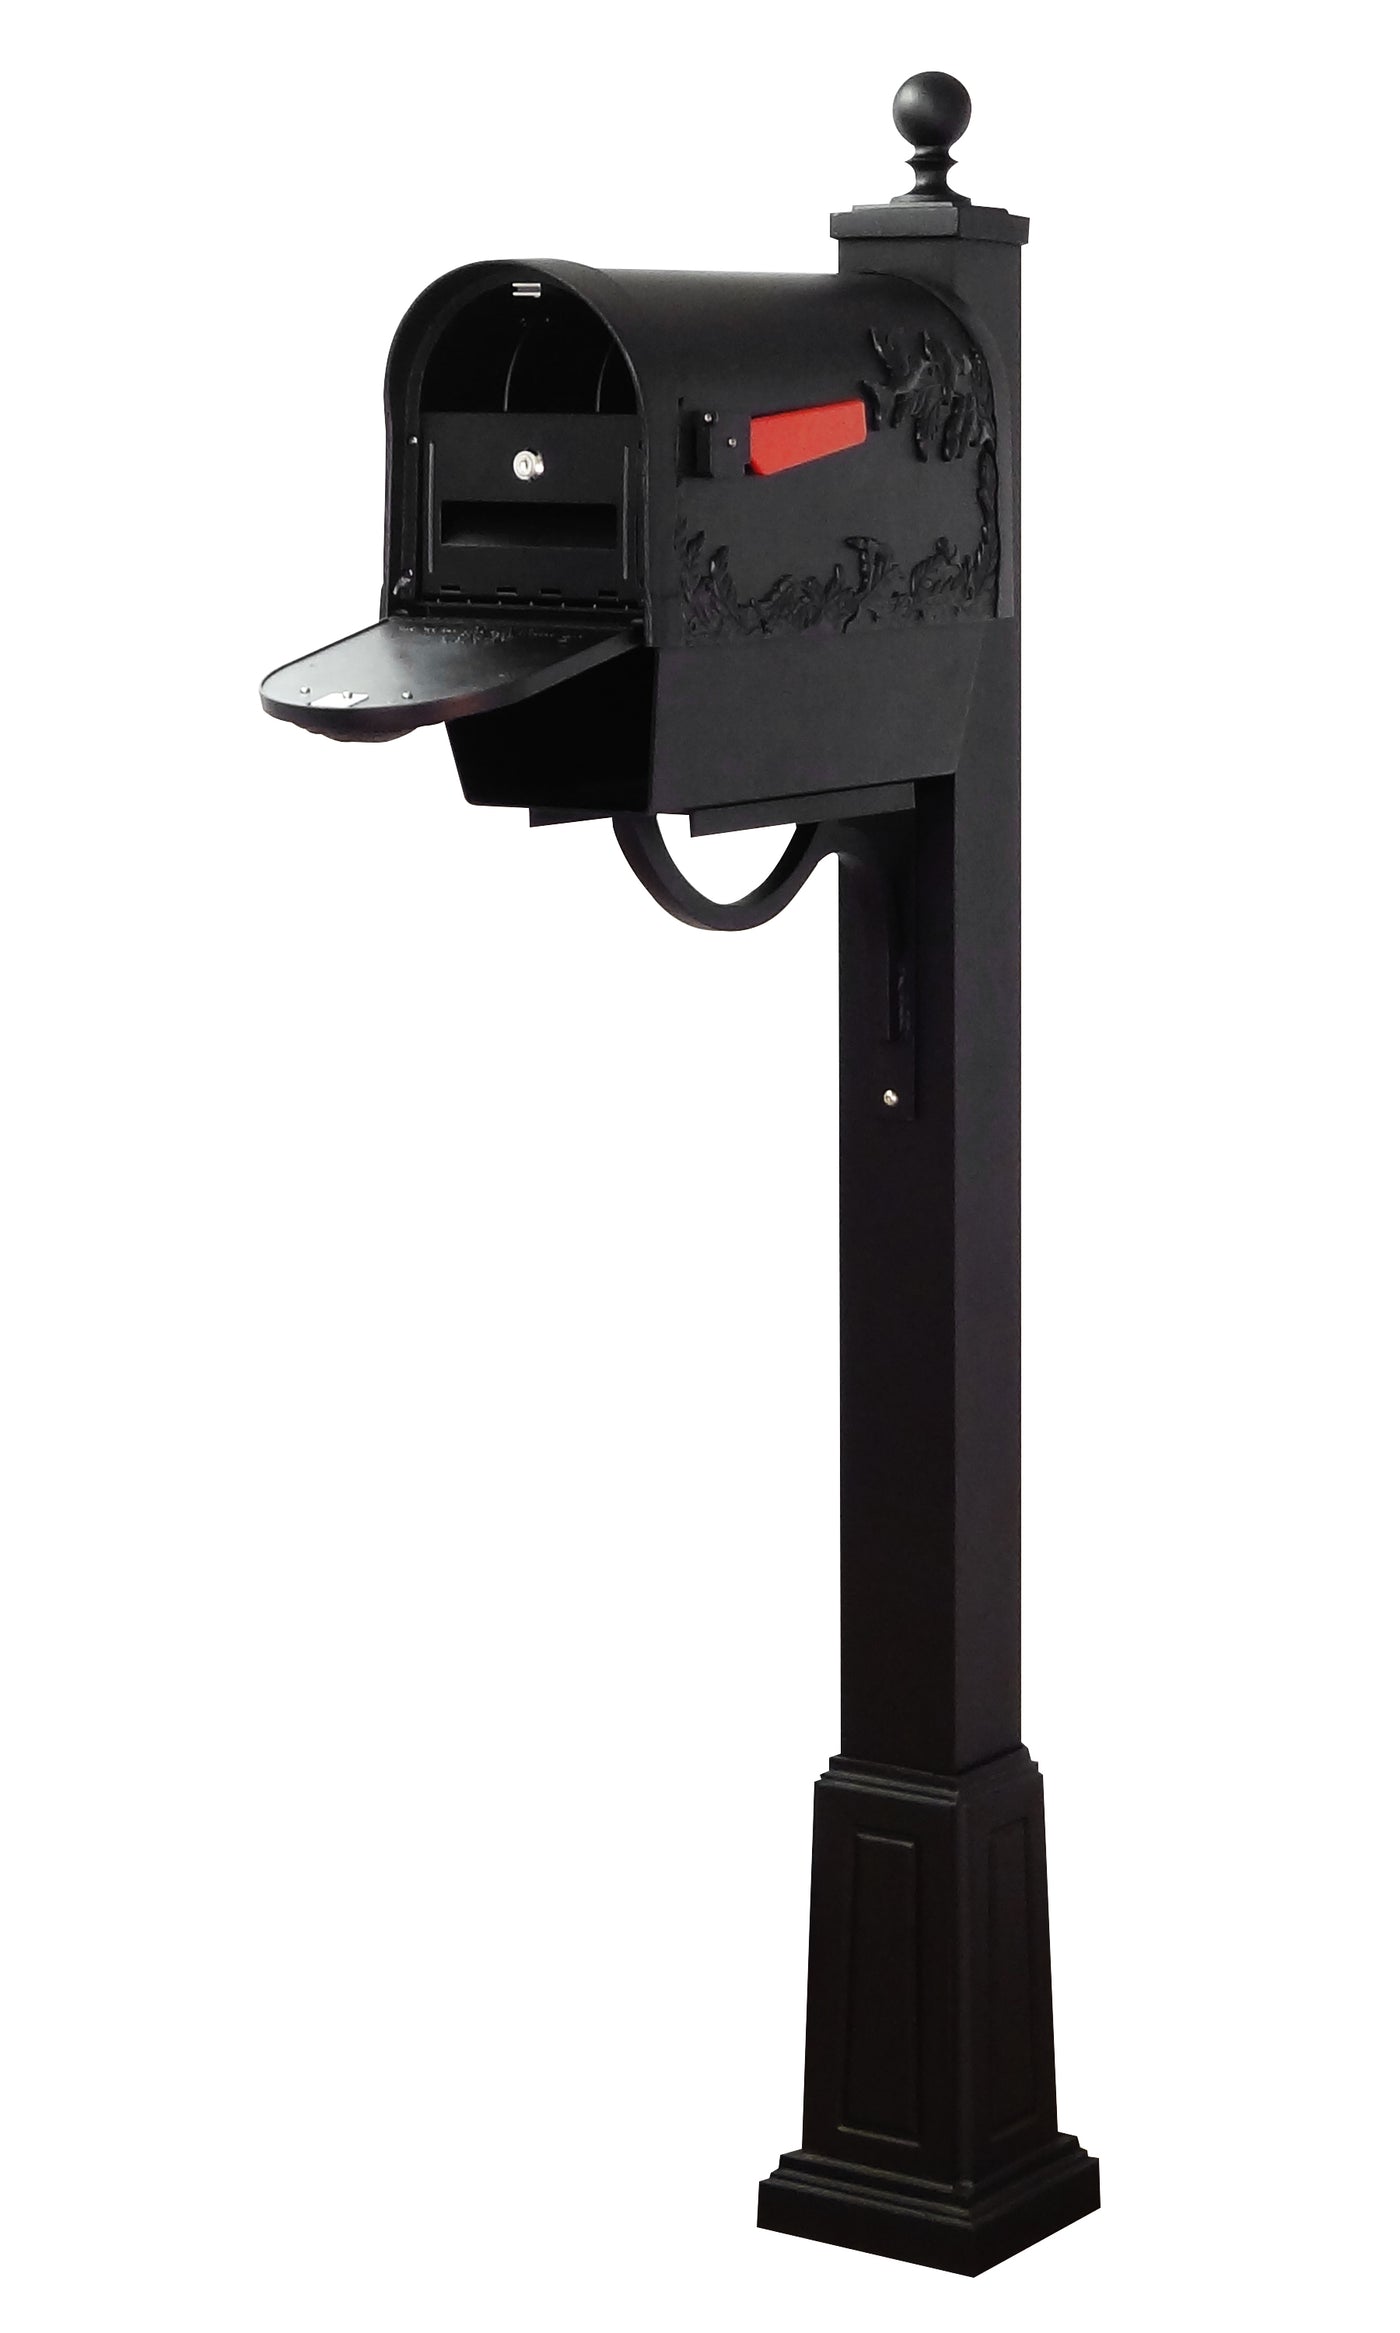 Hummingbird Curbside Mailbox with Newspaper Tube, Locking Insert and Springfield Mailbox Post with Base